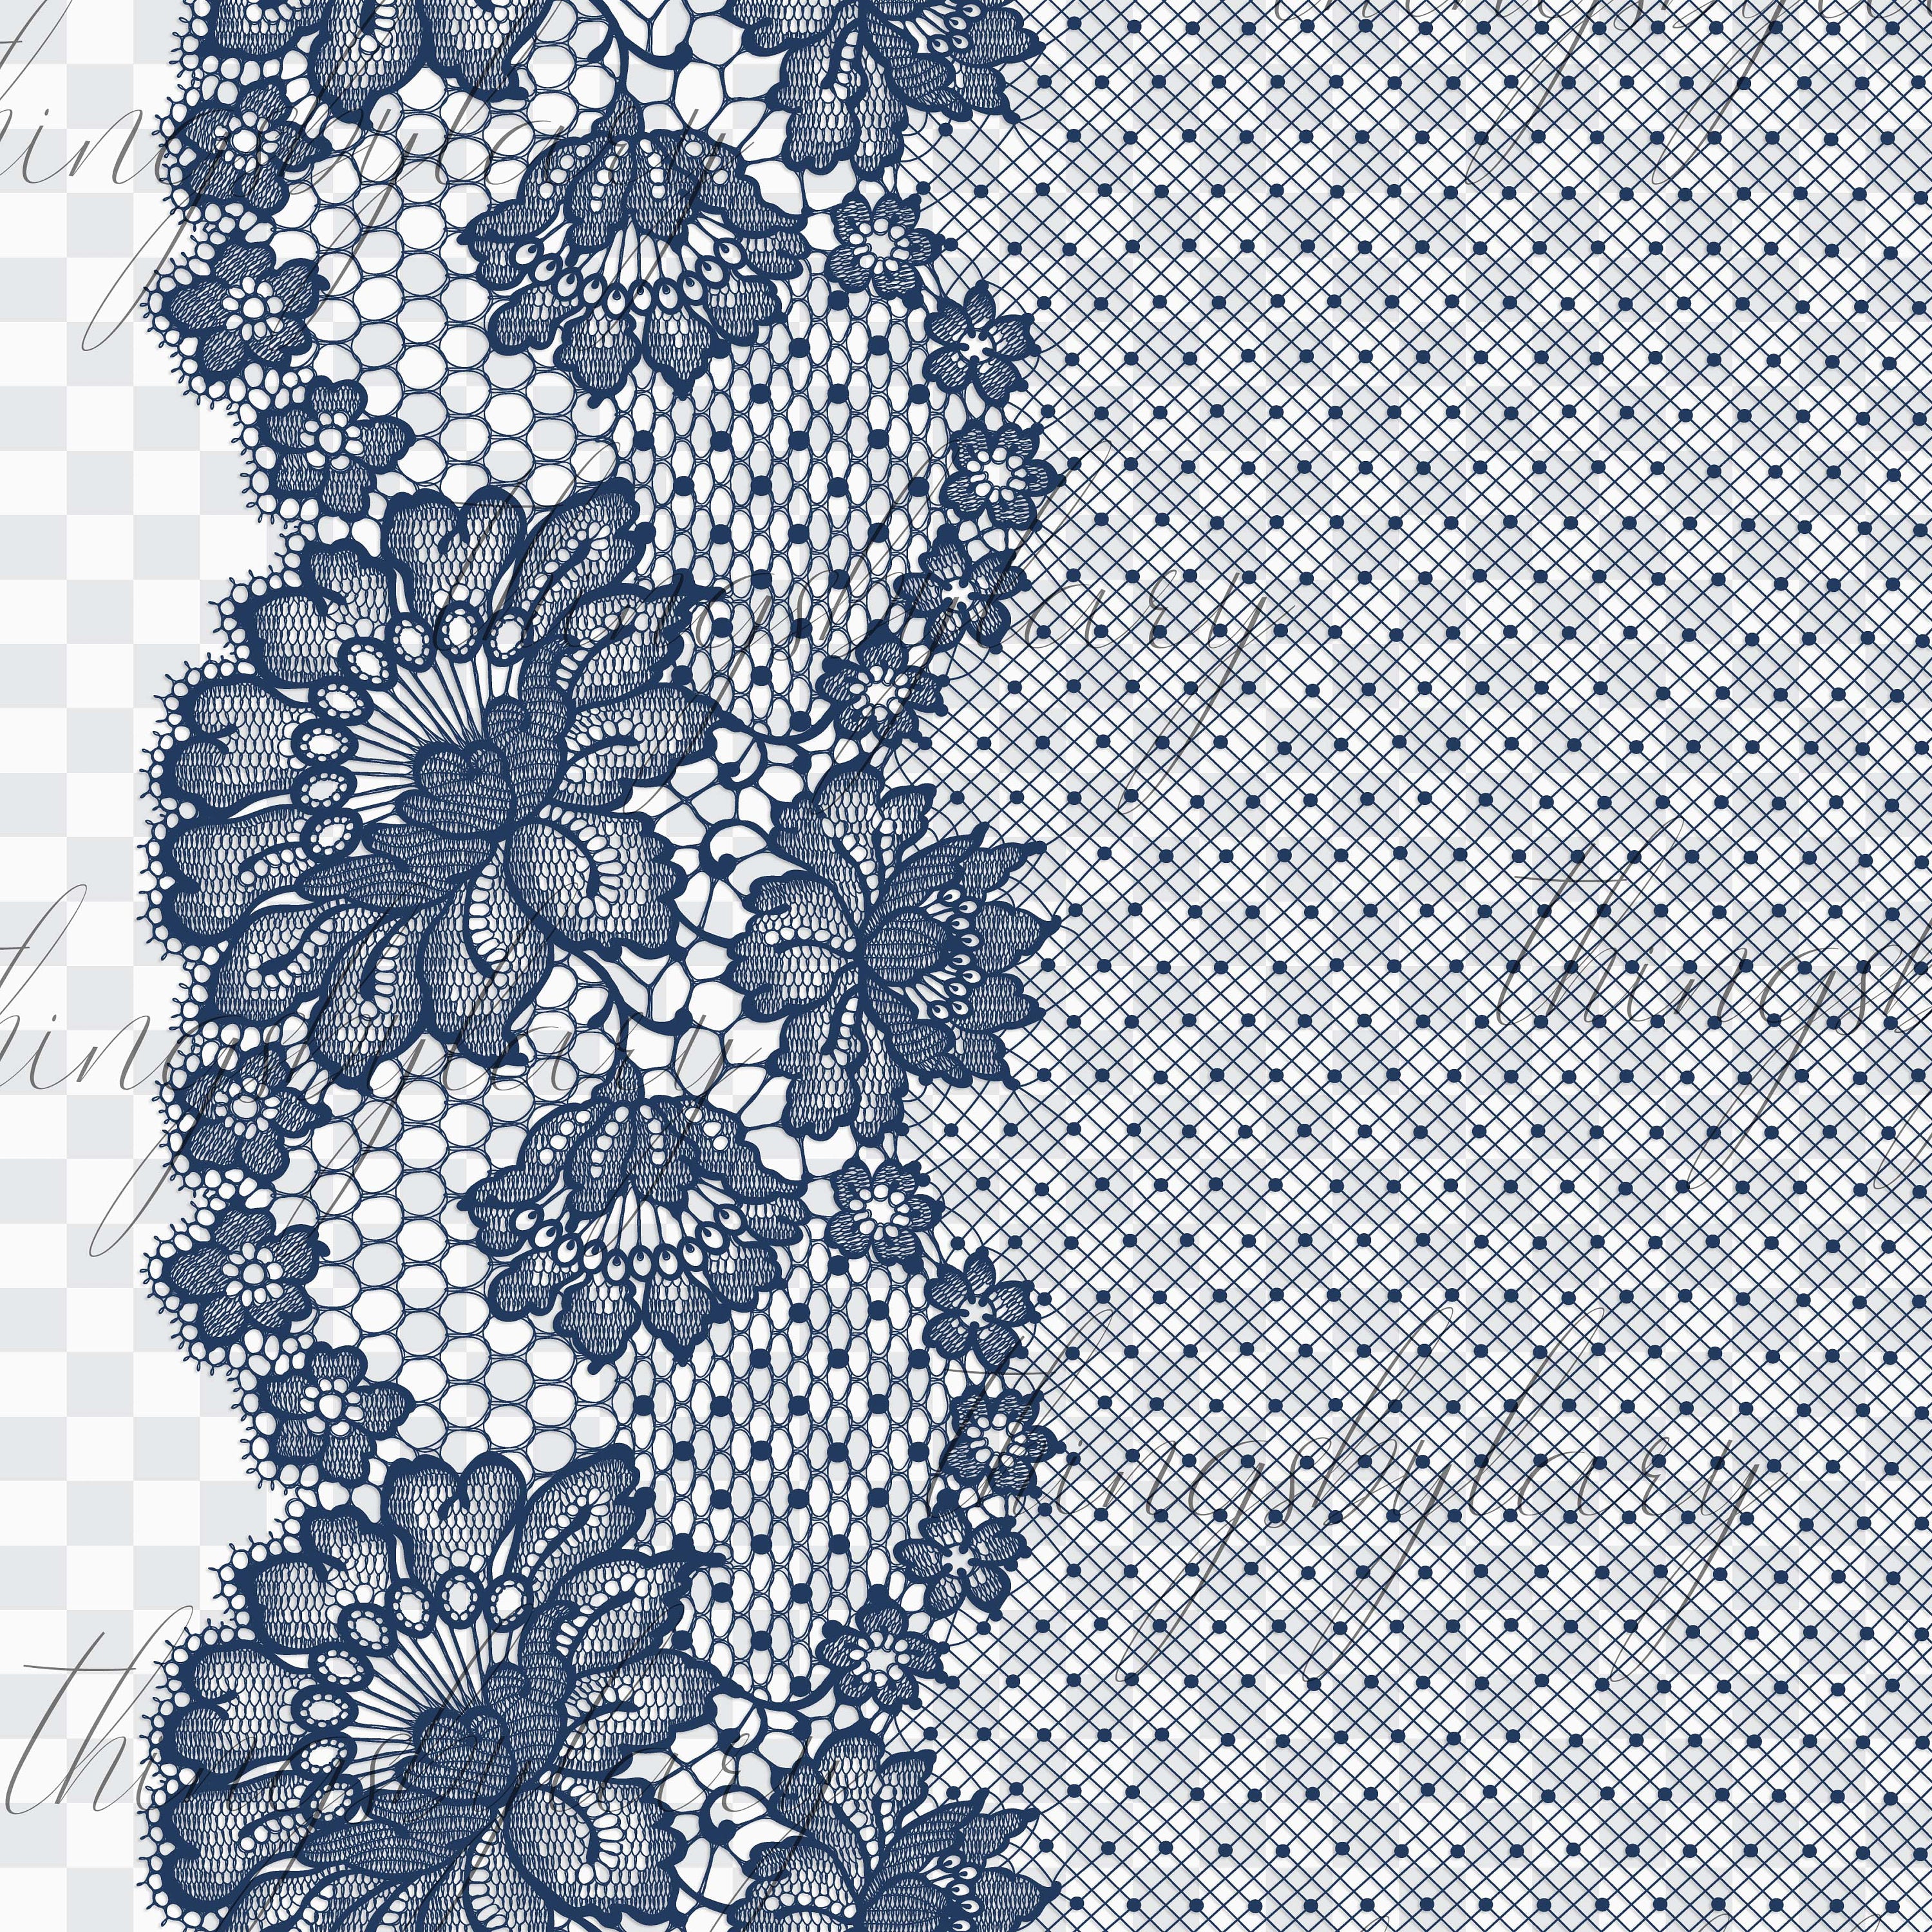 27 Navy Blue Lace Overlays Borders Frames Images PNG Transparent 300 Dpi Instant Download Commercial Use Shabby Chic Wedding Romantic Lacy